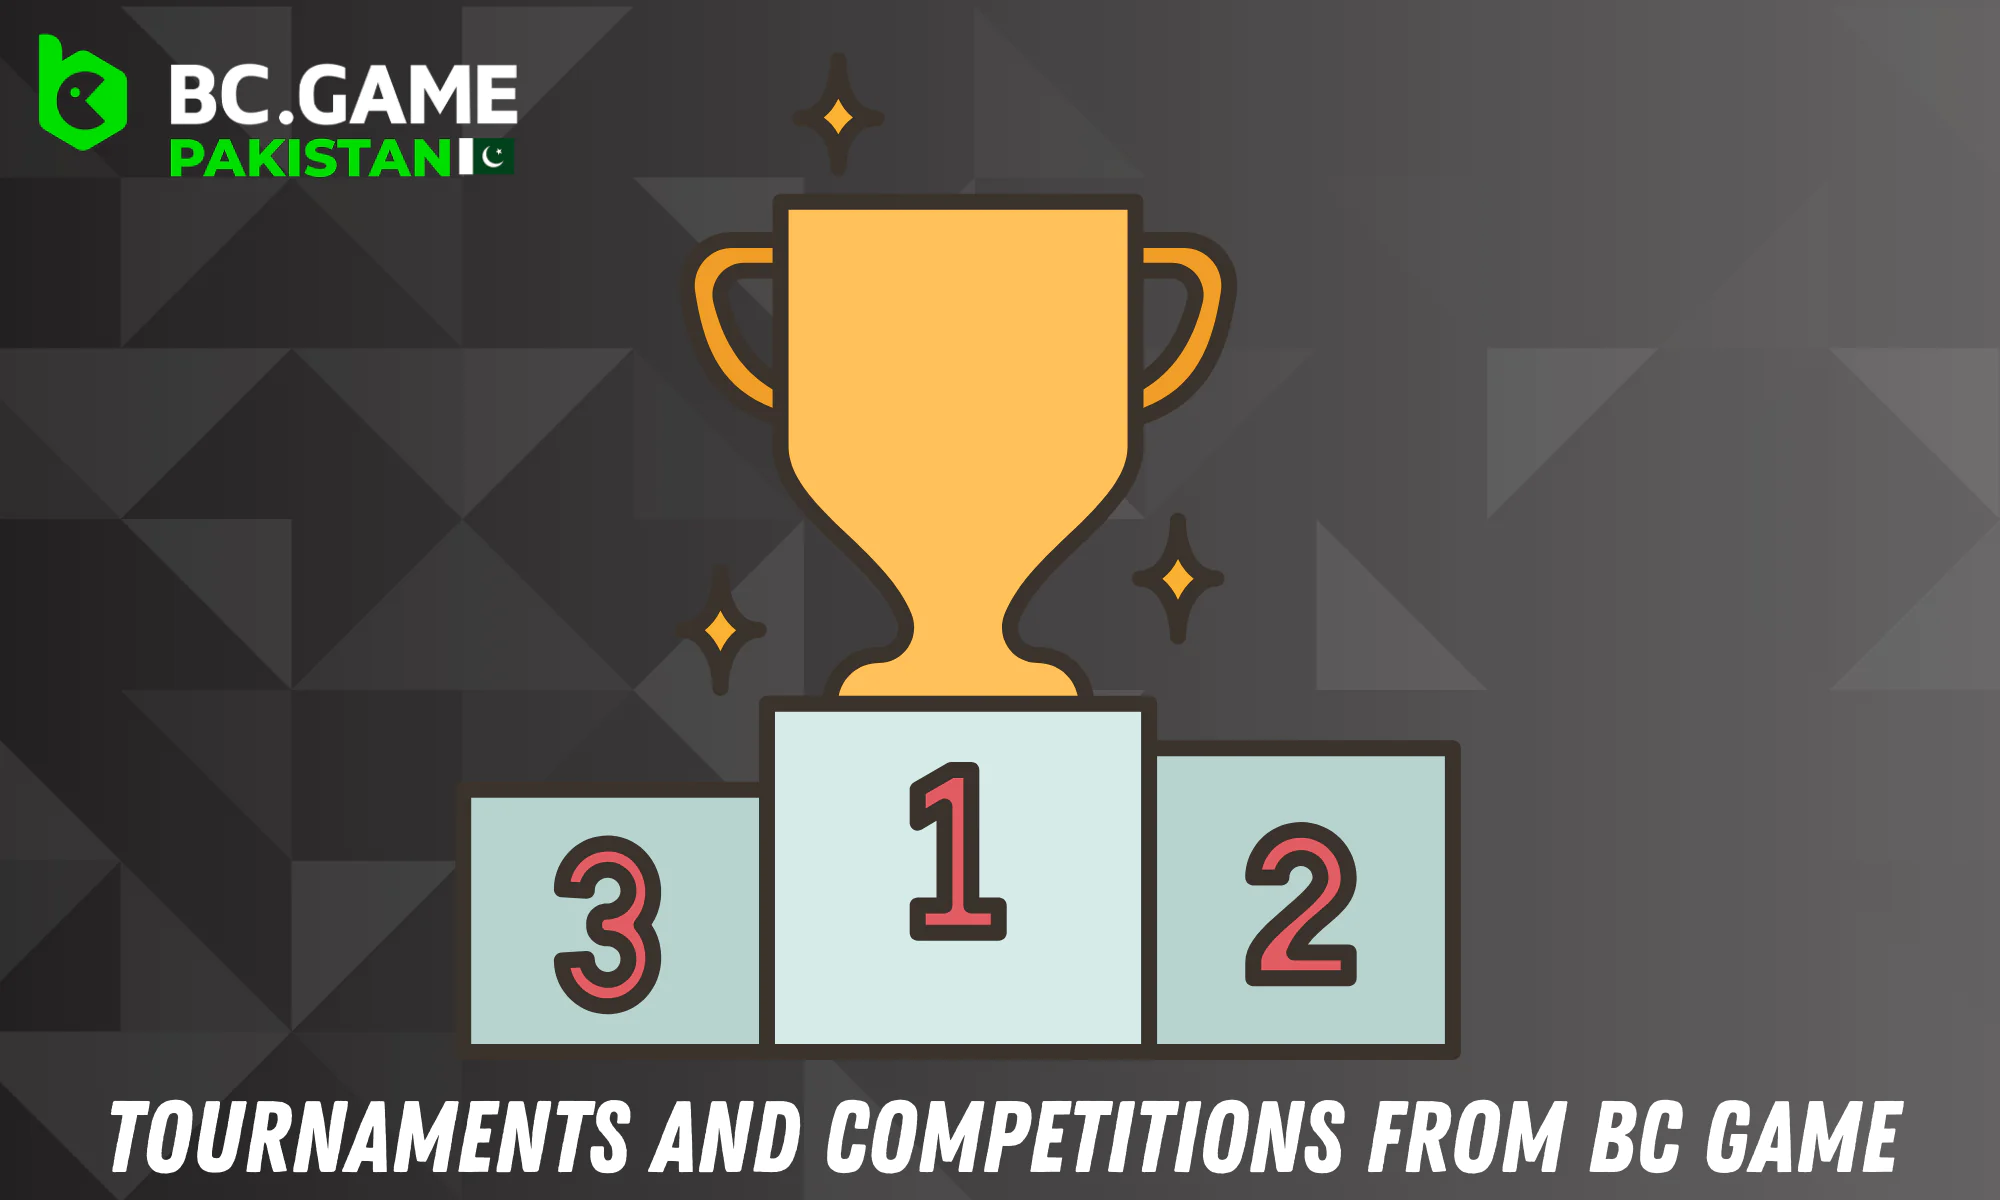 Various BC Game tournaments and competitions are regularly held for Pakistani players